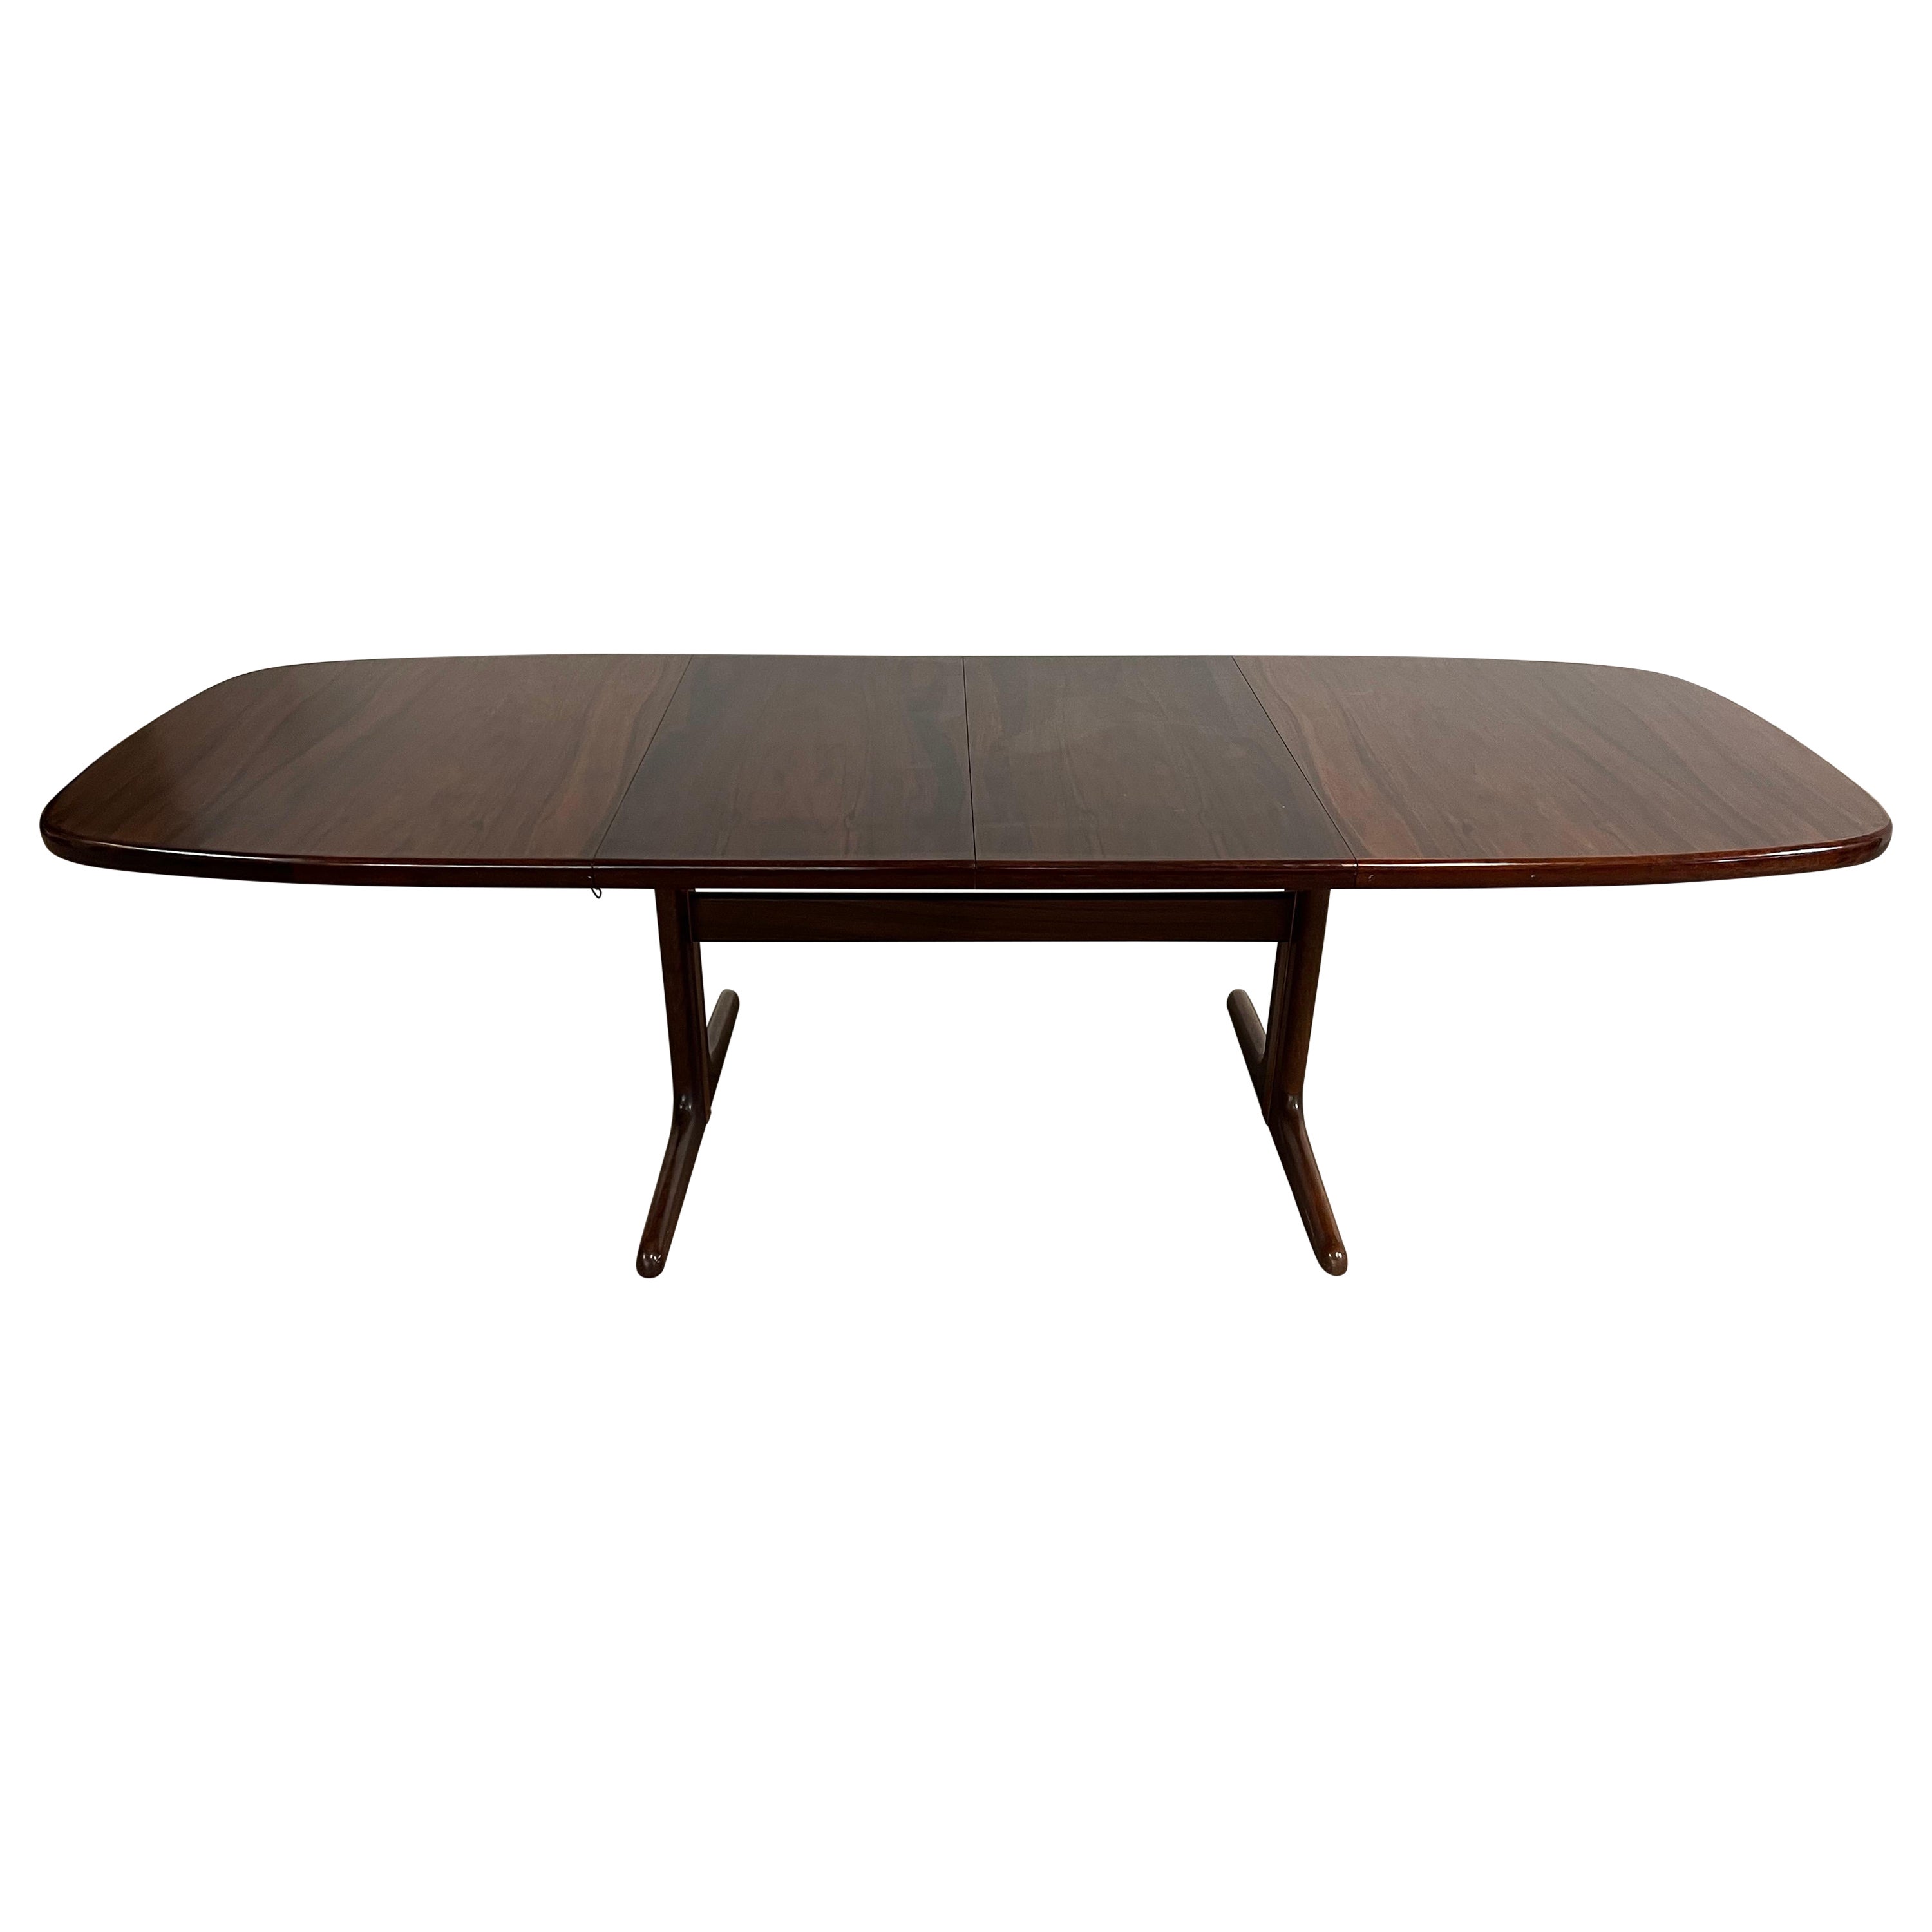 Danish Modern Dining Table Rosewood 103.5" Extendable Surfboard